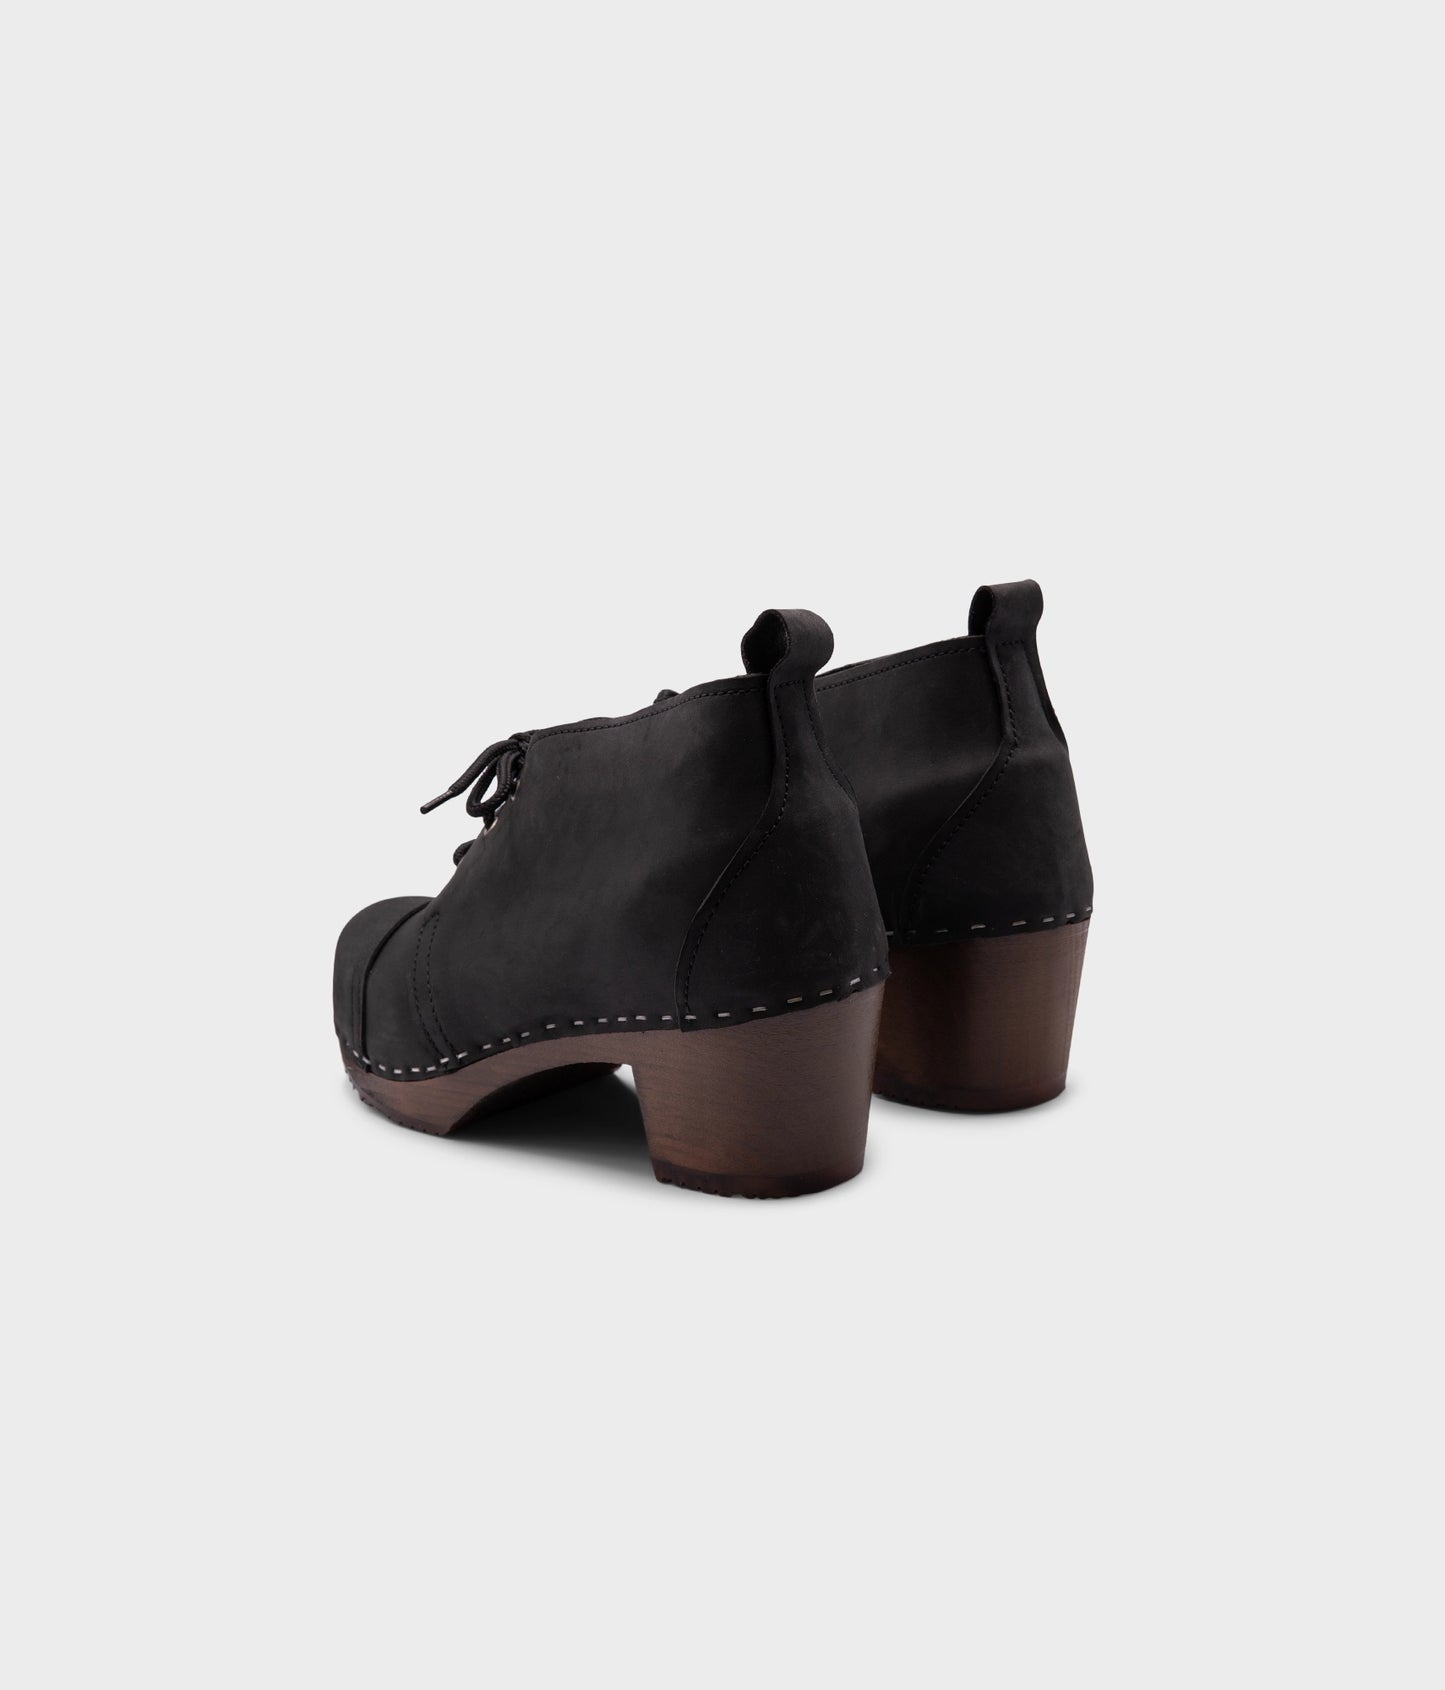 high heeled chukka clog boots in black nubuck leather stapled on a dark wooden base with black laces